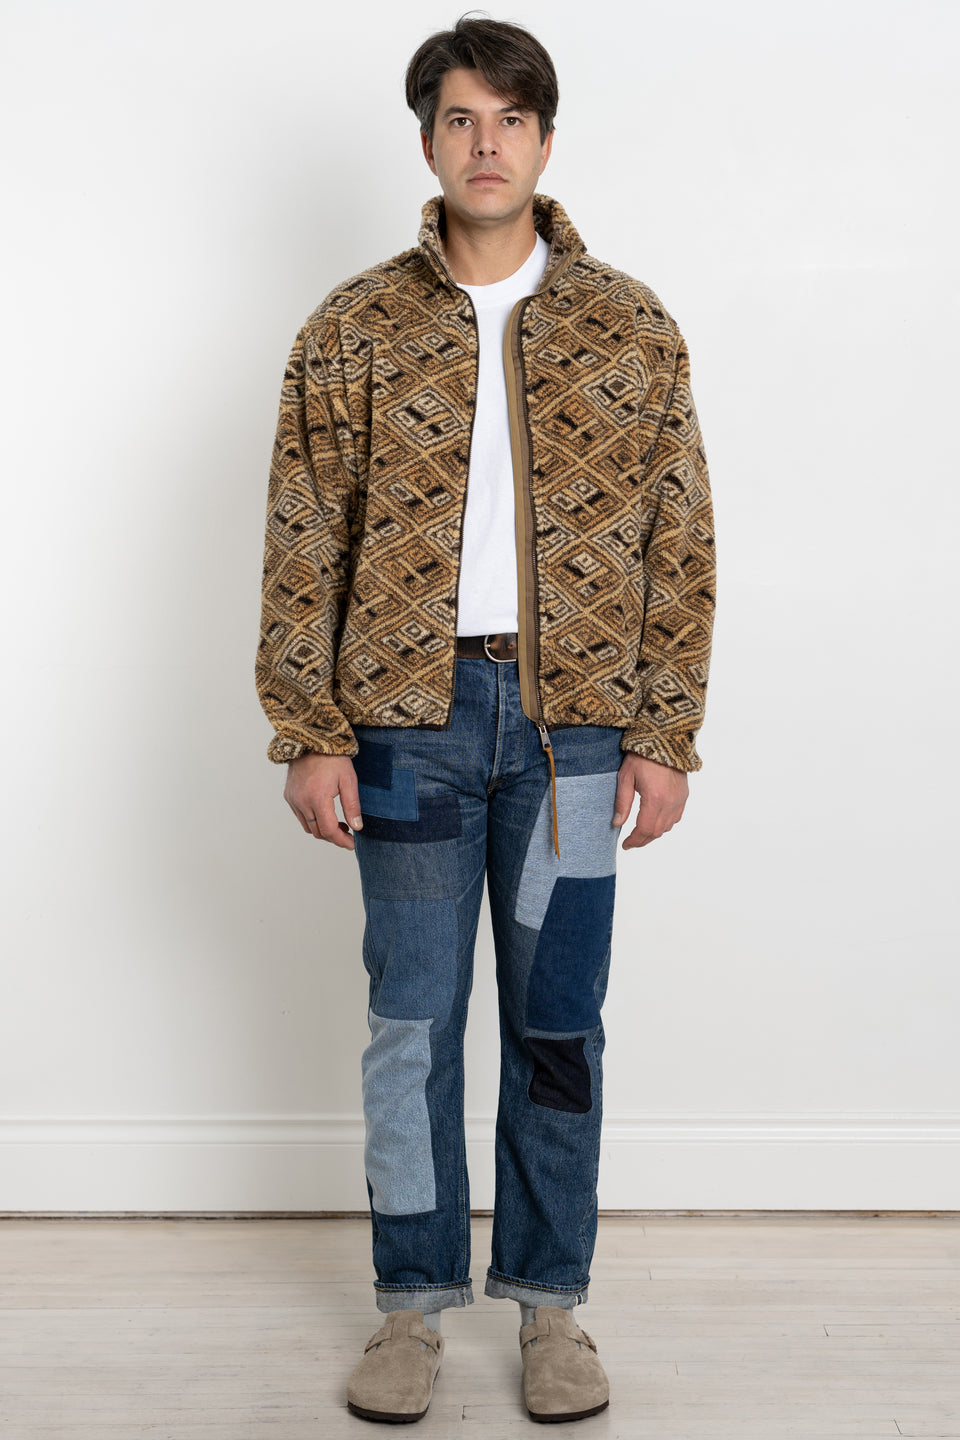 orSlow Japan 23AW FW23 Men's Collection African Pattern Boa Fleece Jacket Calculus Victoria BC Canada